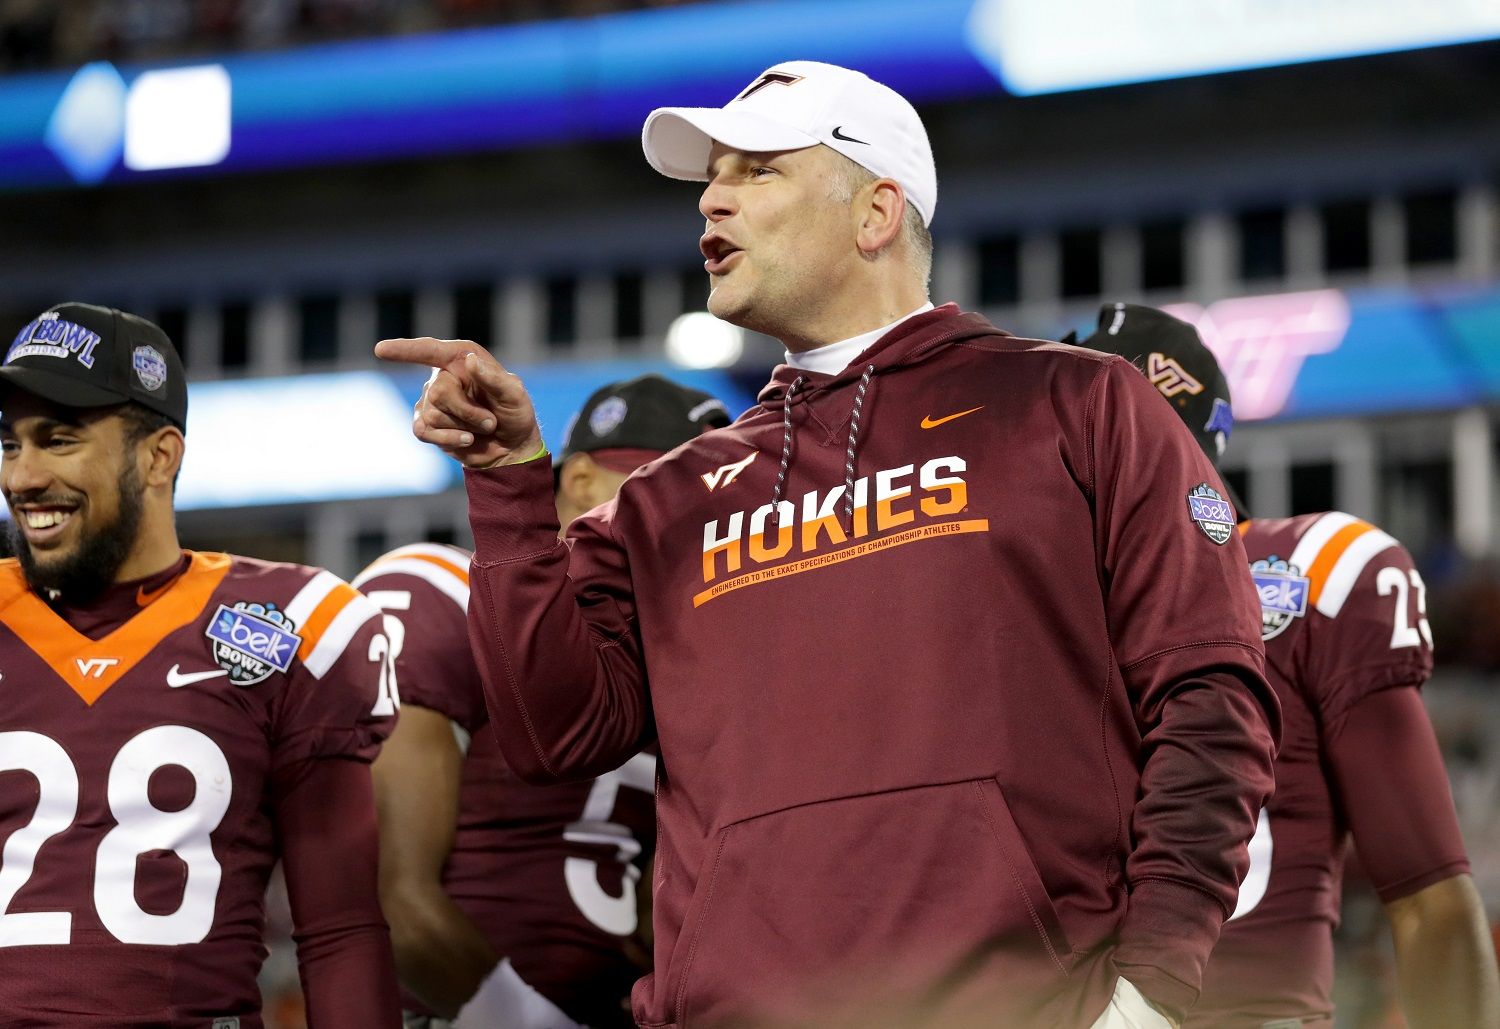 CHARLOTTE, NC - DECEMBER 29:  Head coach Justin Fuente of the Virginia Tech Hokies celebrates after defeating the Arkansas Razorbacks 35-24 in the Belk Bowl at Bank of America Stadium on December 29, 2016 in Charlotte, North Carolina.  (Photo by Streeter Lecka/Getty Images)